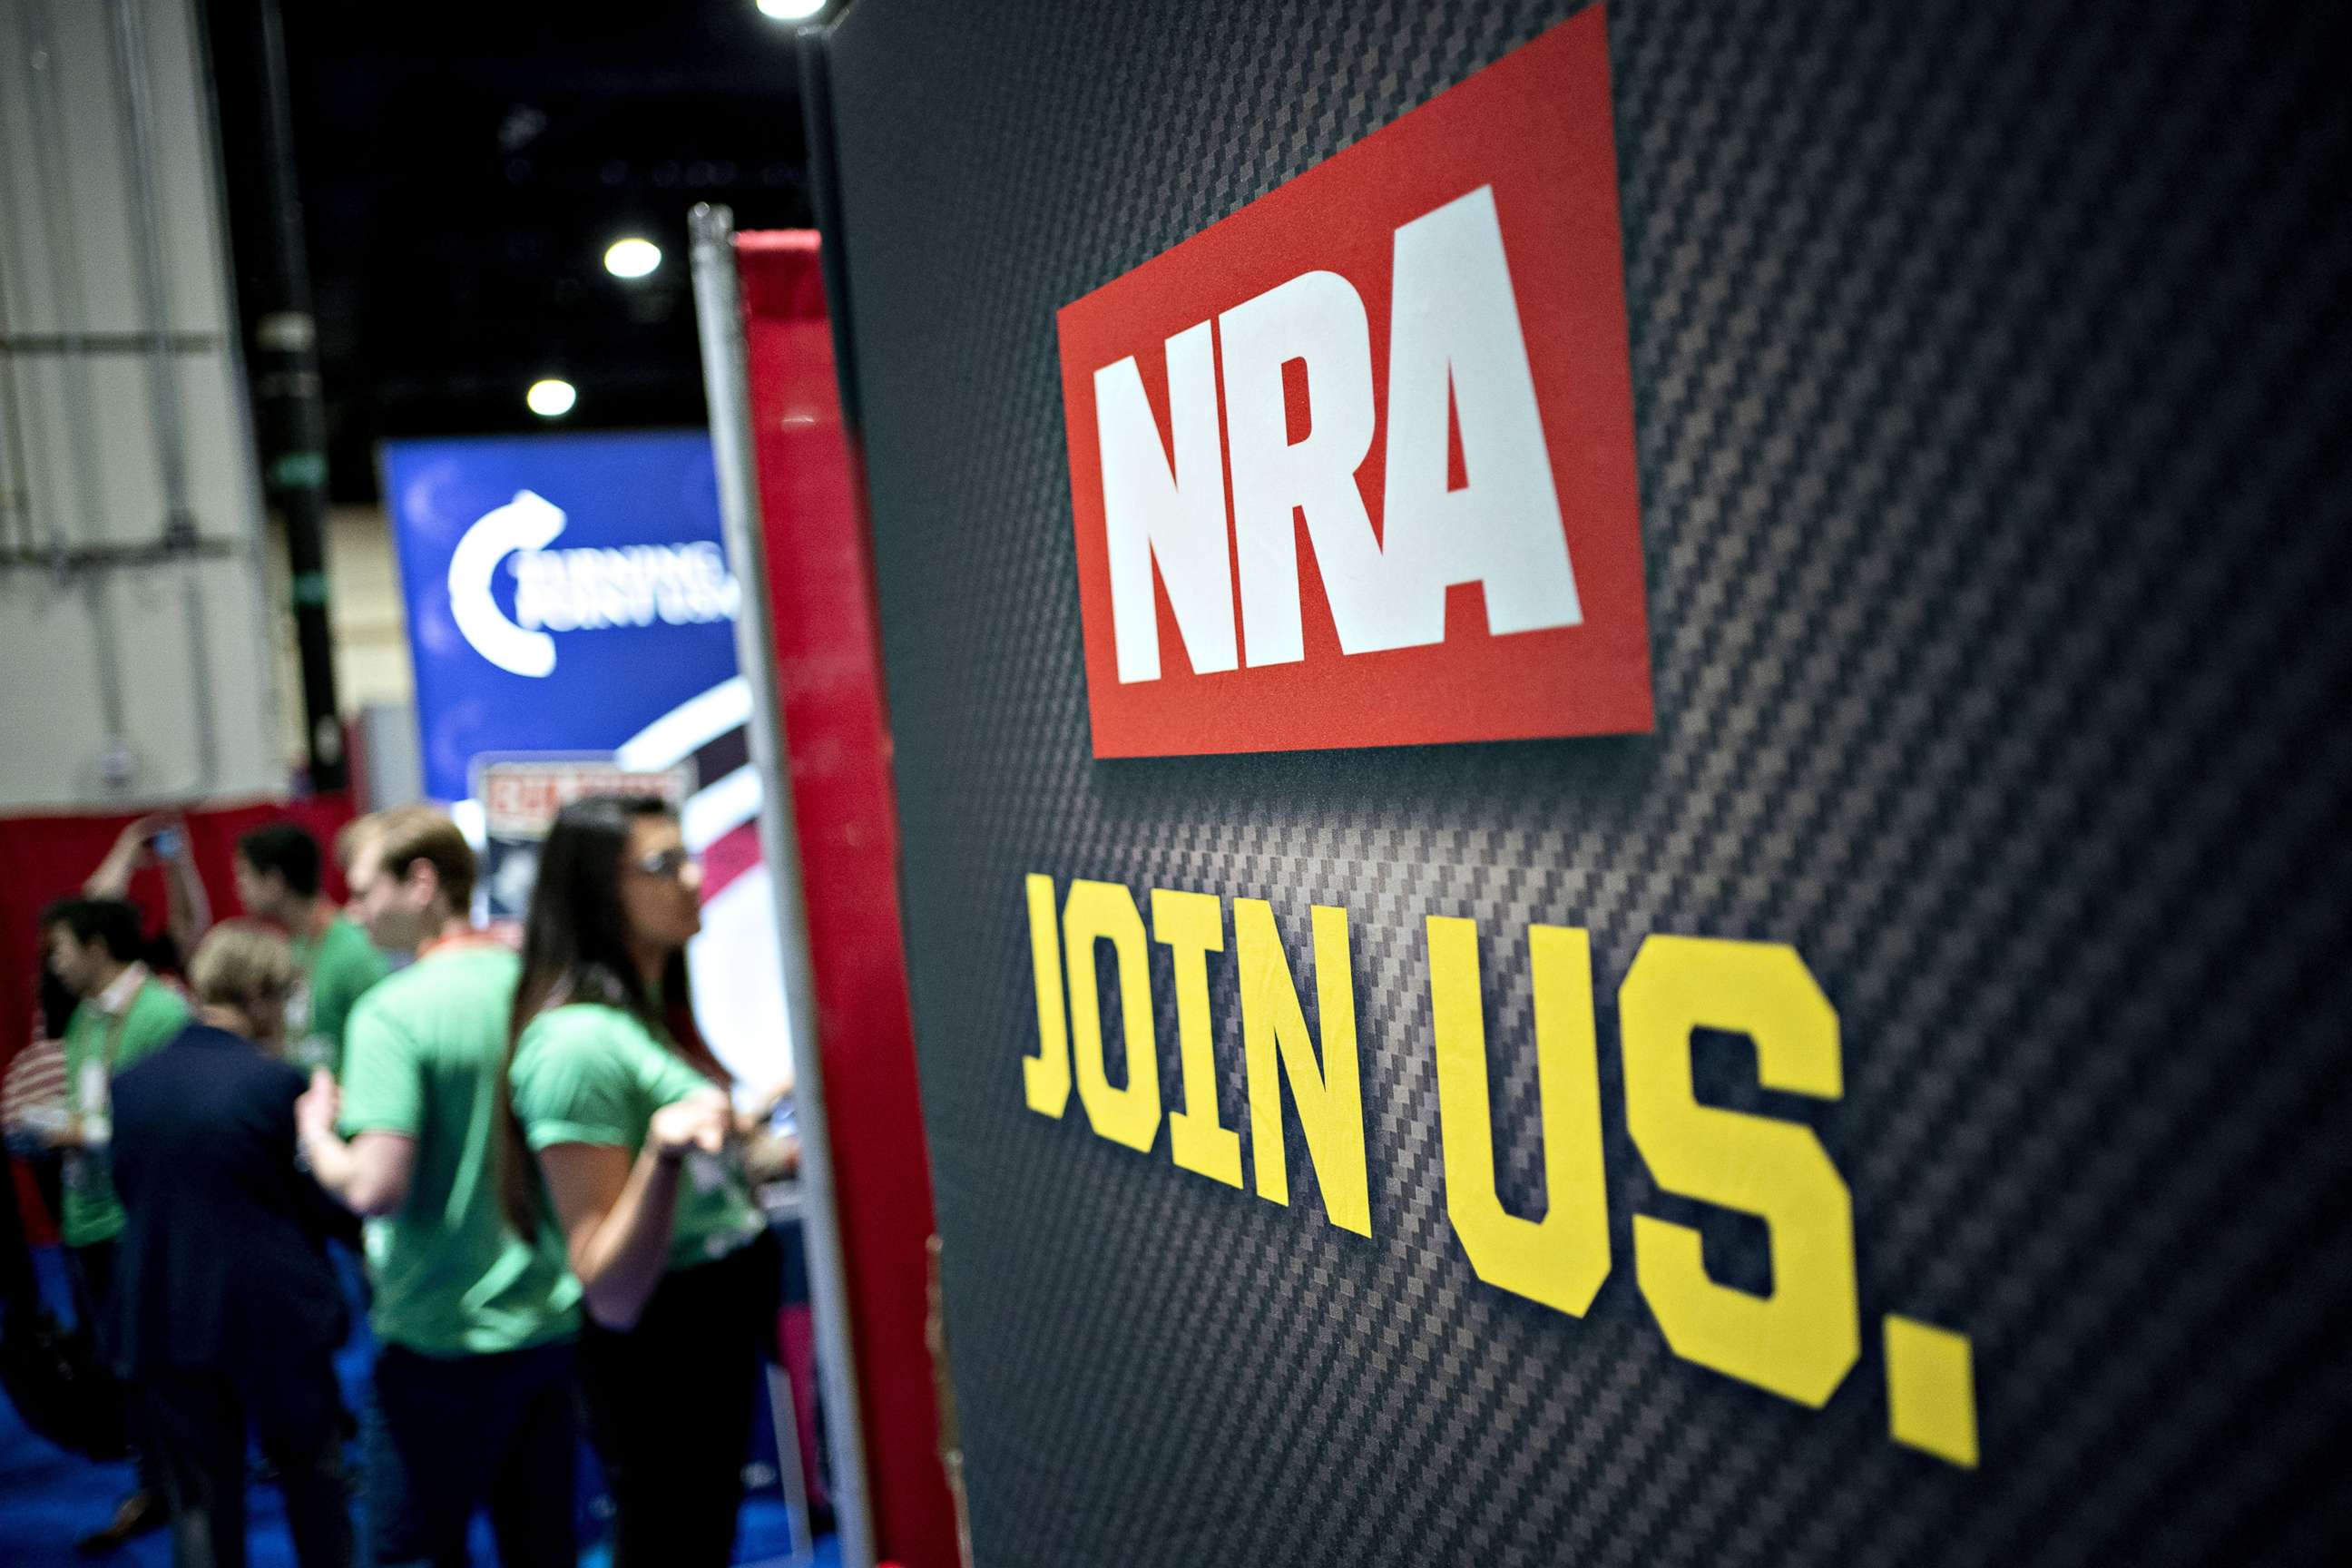 PHOTO: In this Feb. 28, 2020 file photo National Rifle Association (NRA) signage stands in the exhibition hall during the Conservative Political Action Conference (CPAC) in National Harbor, Md. 